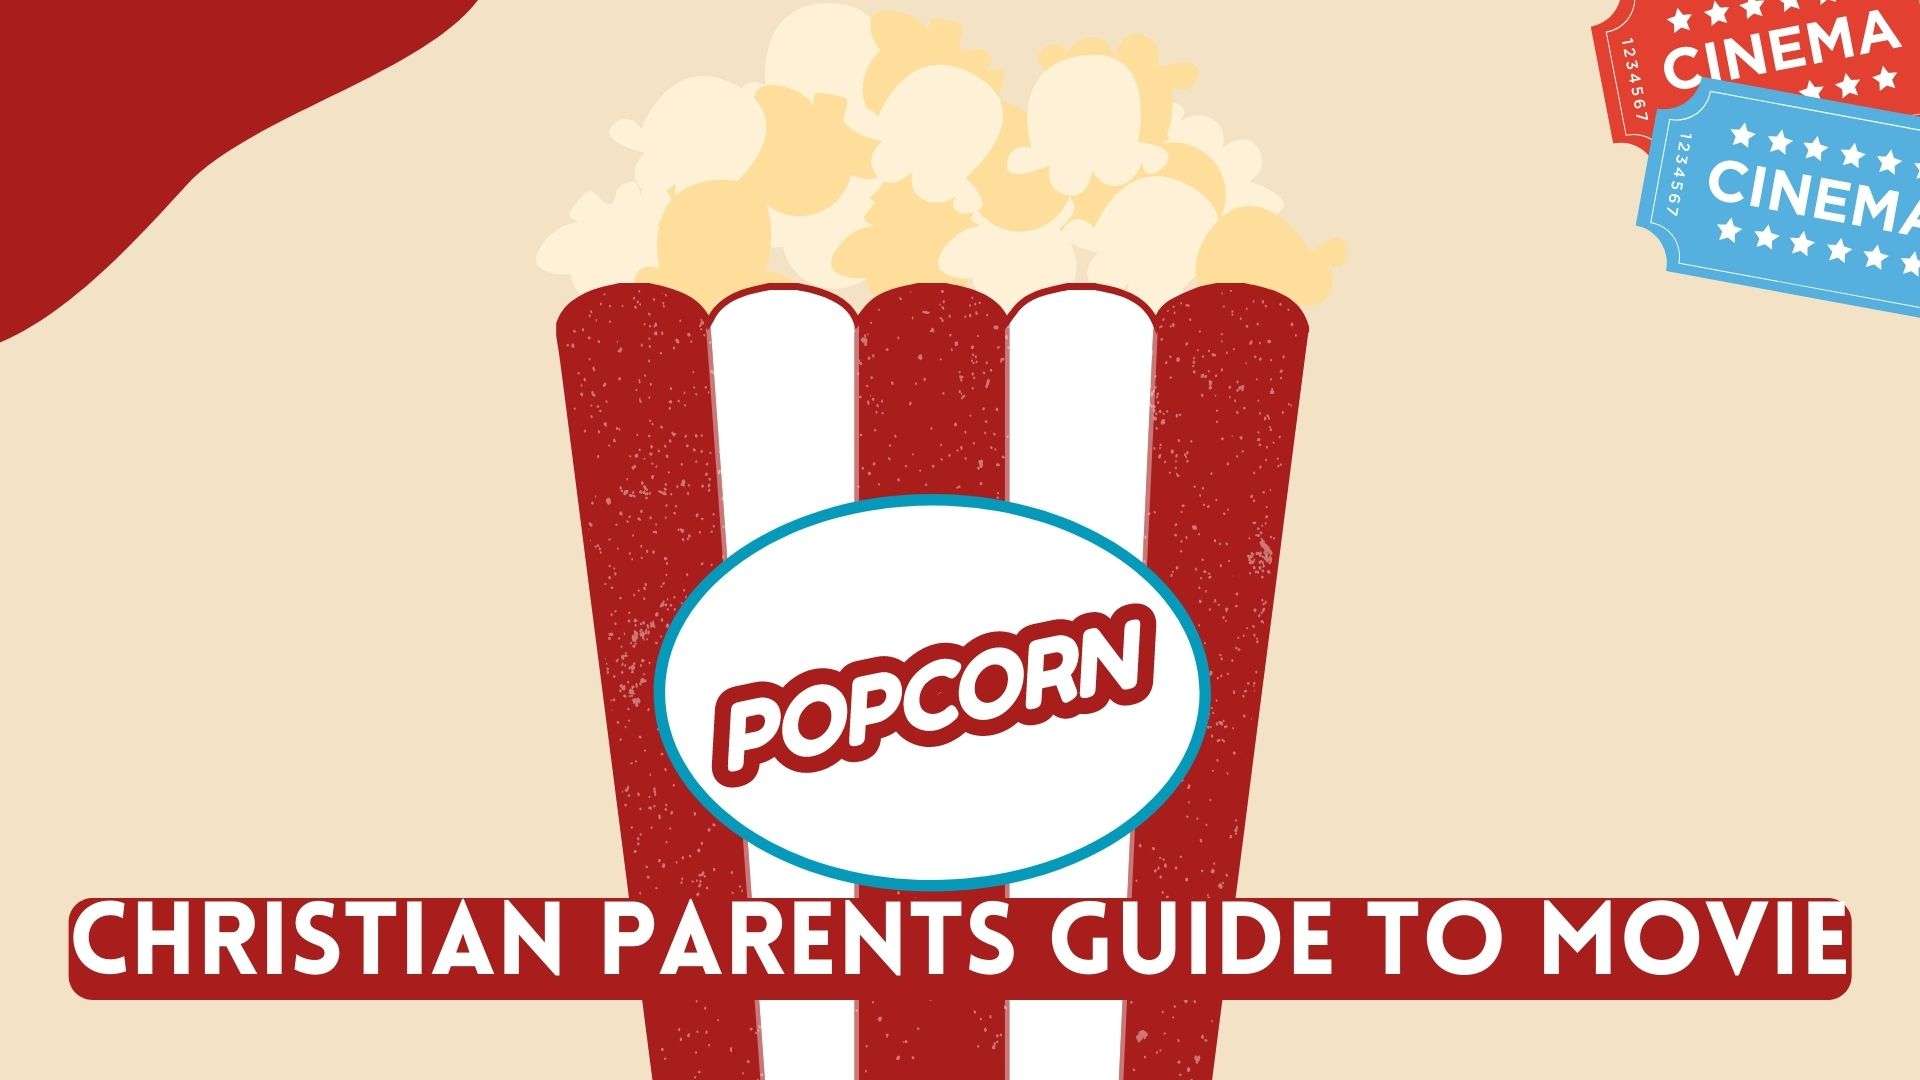 Christian Parents Guide to Movie wallpaper and images